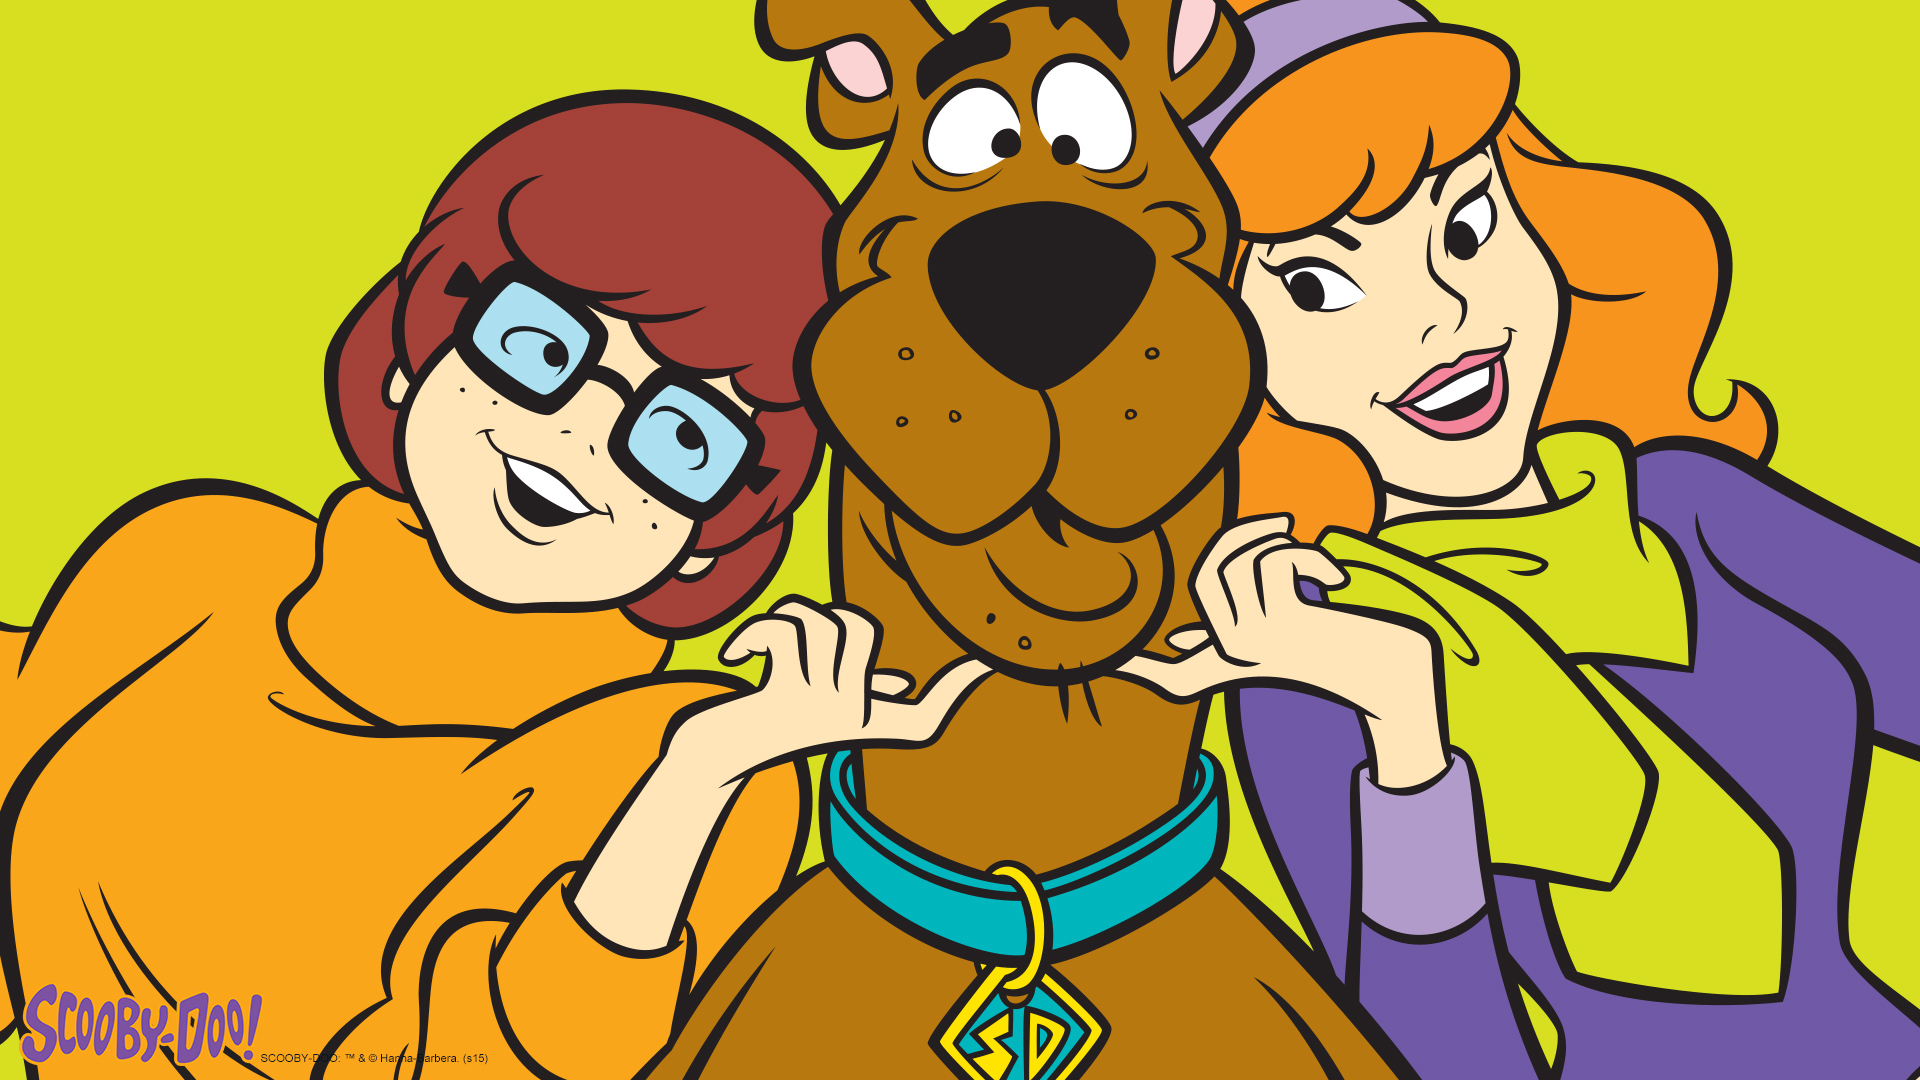 Six double features to double feature with scooby